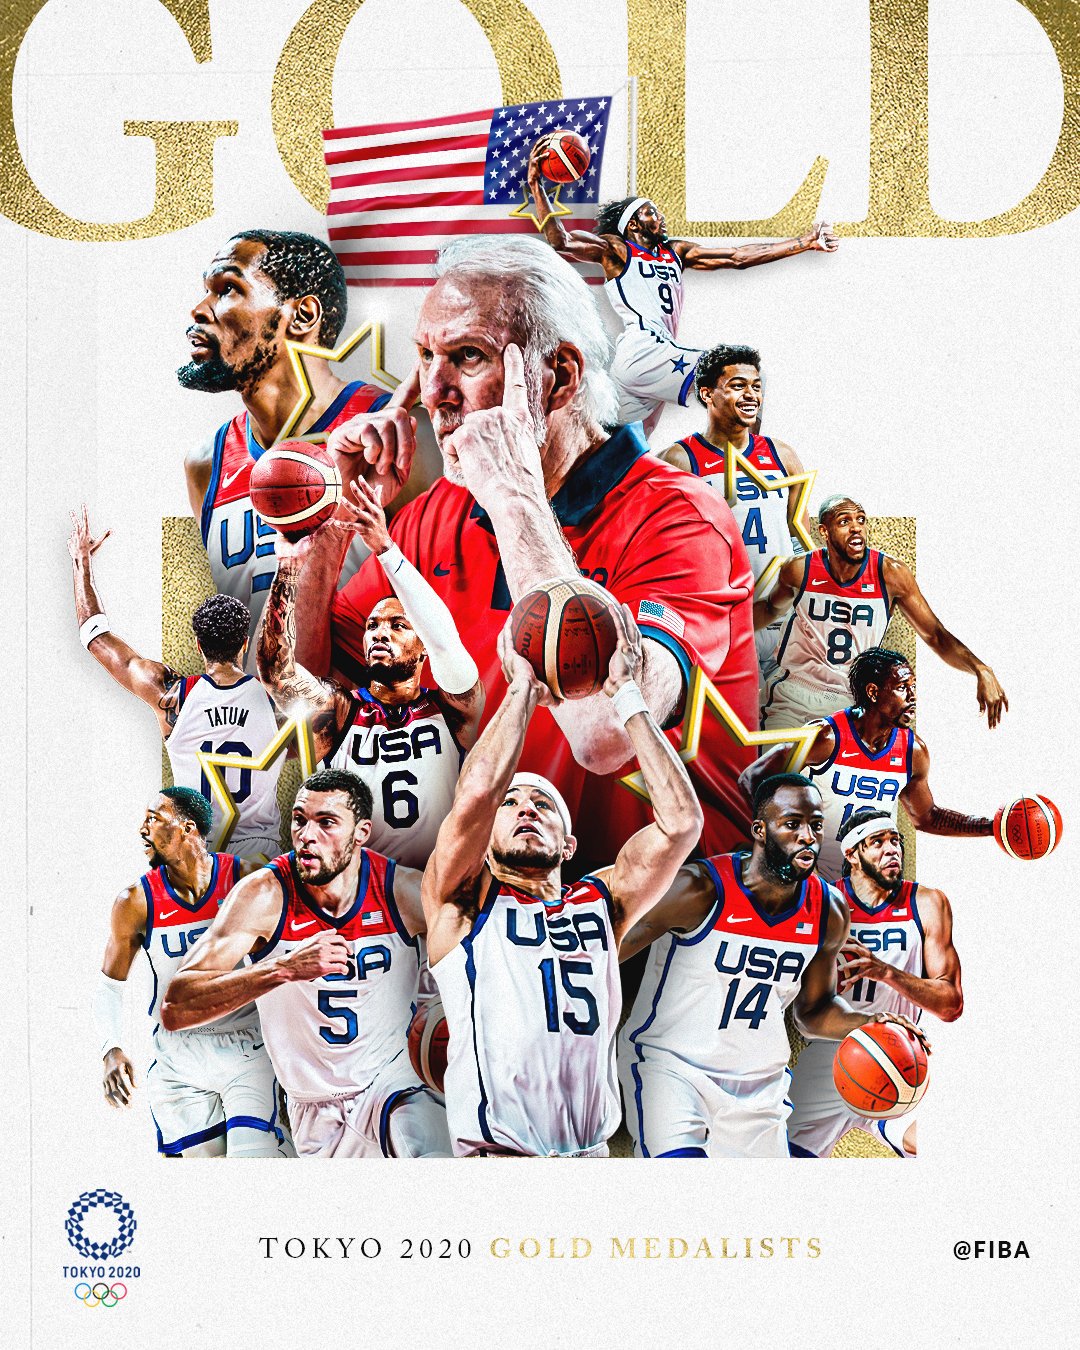 Team USA Men's Basketball team wins fourth Olympic Gold medal in a row